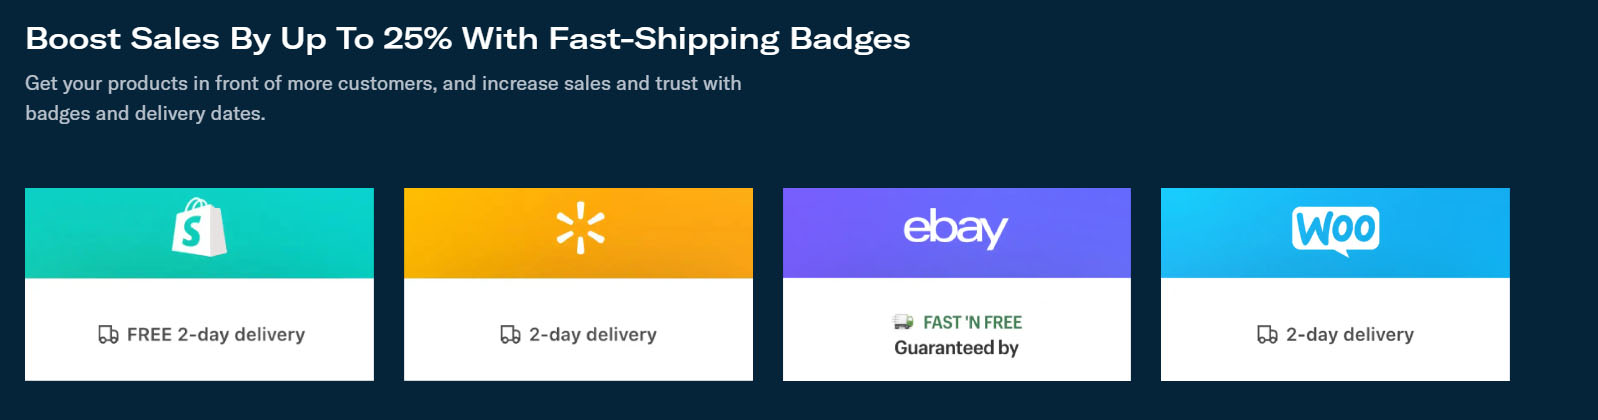 Screenshot of Flexport's website with fast shipping badges that boost sales up to 25%.